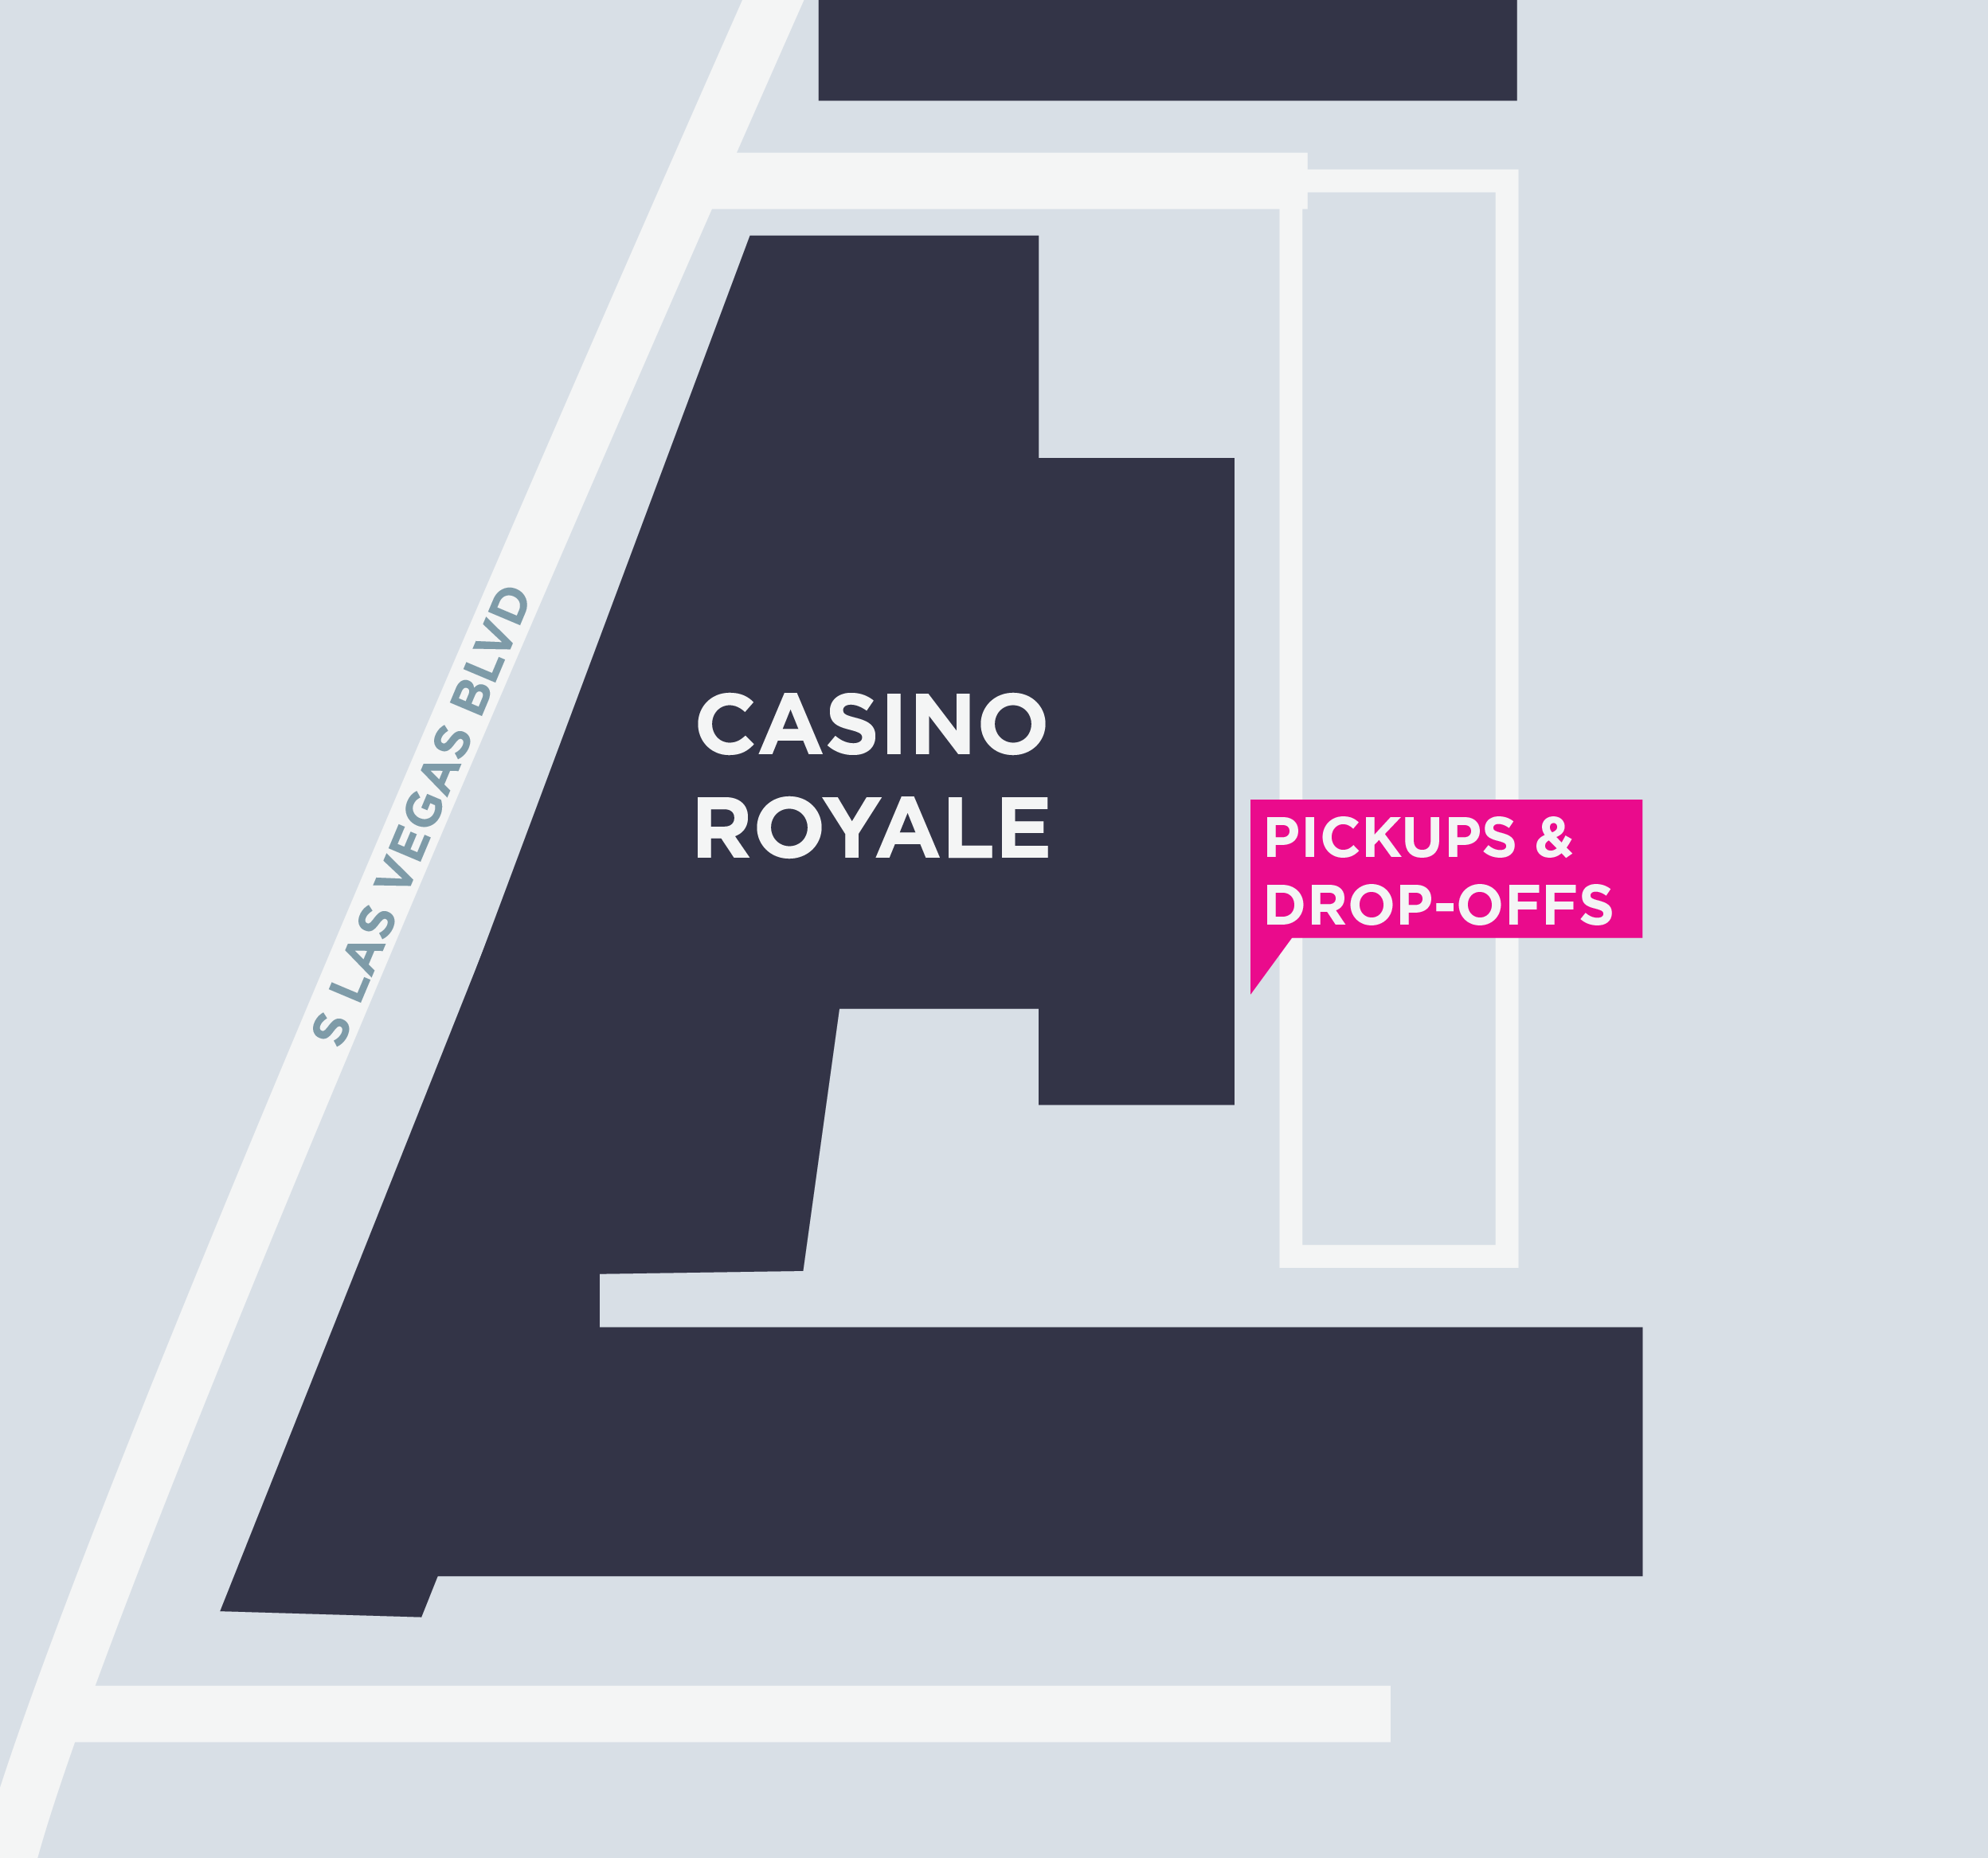 Map of the Casino Royale, including pickup and dropoff areas.